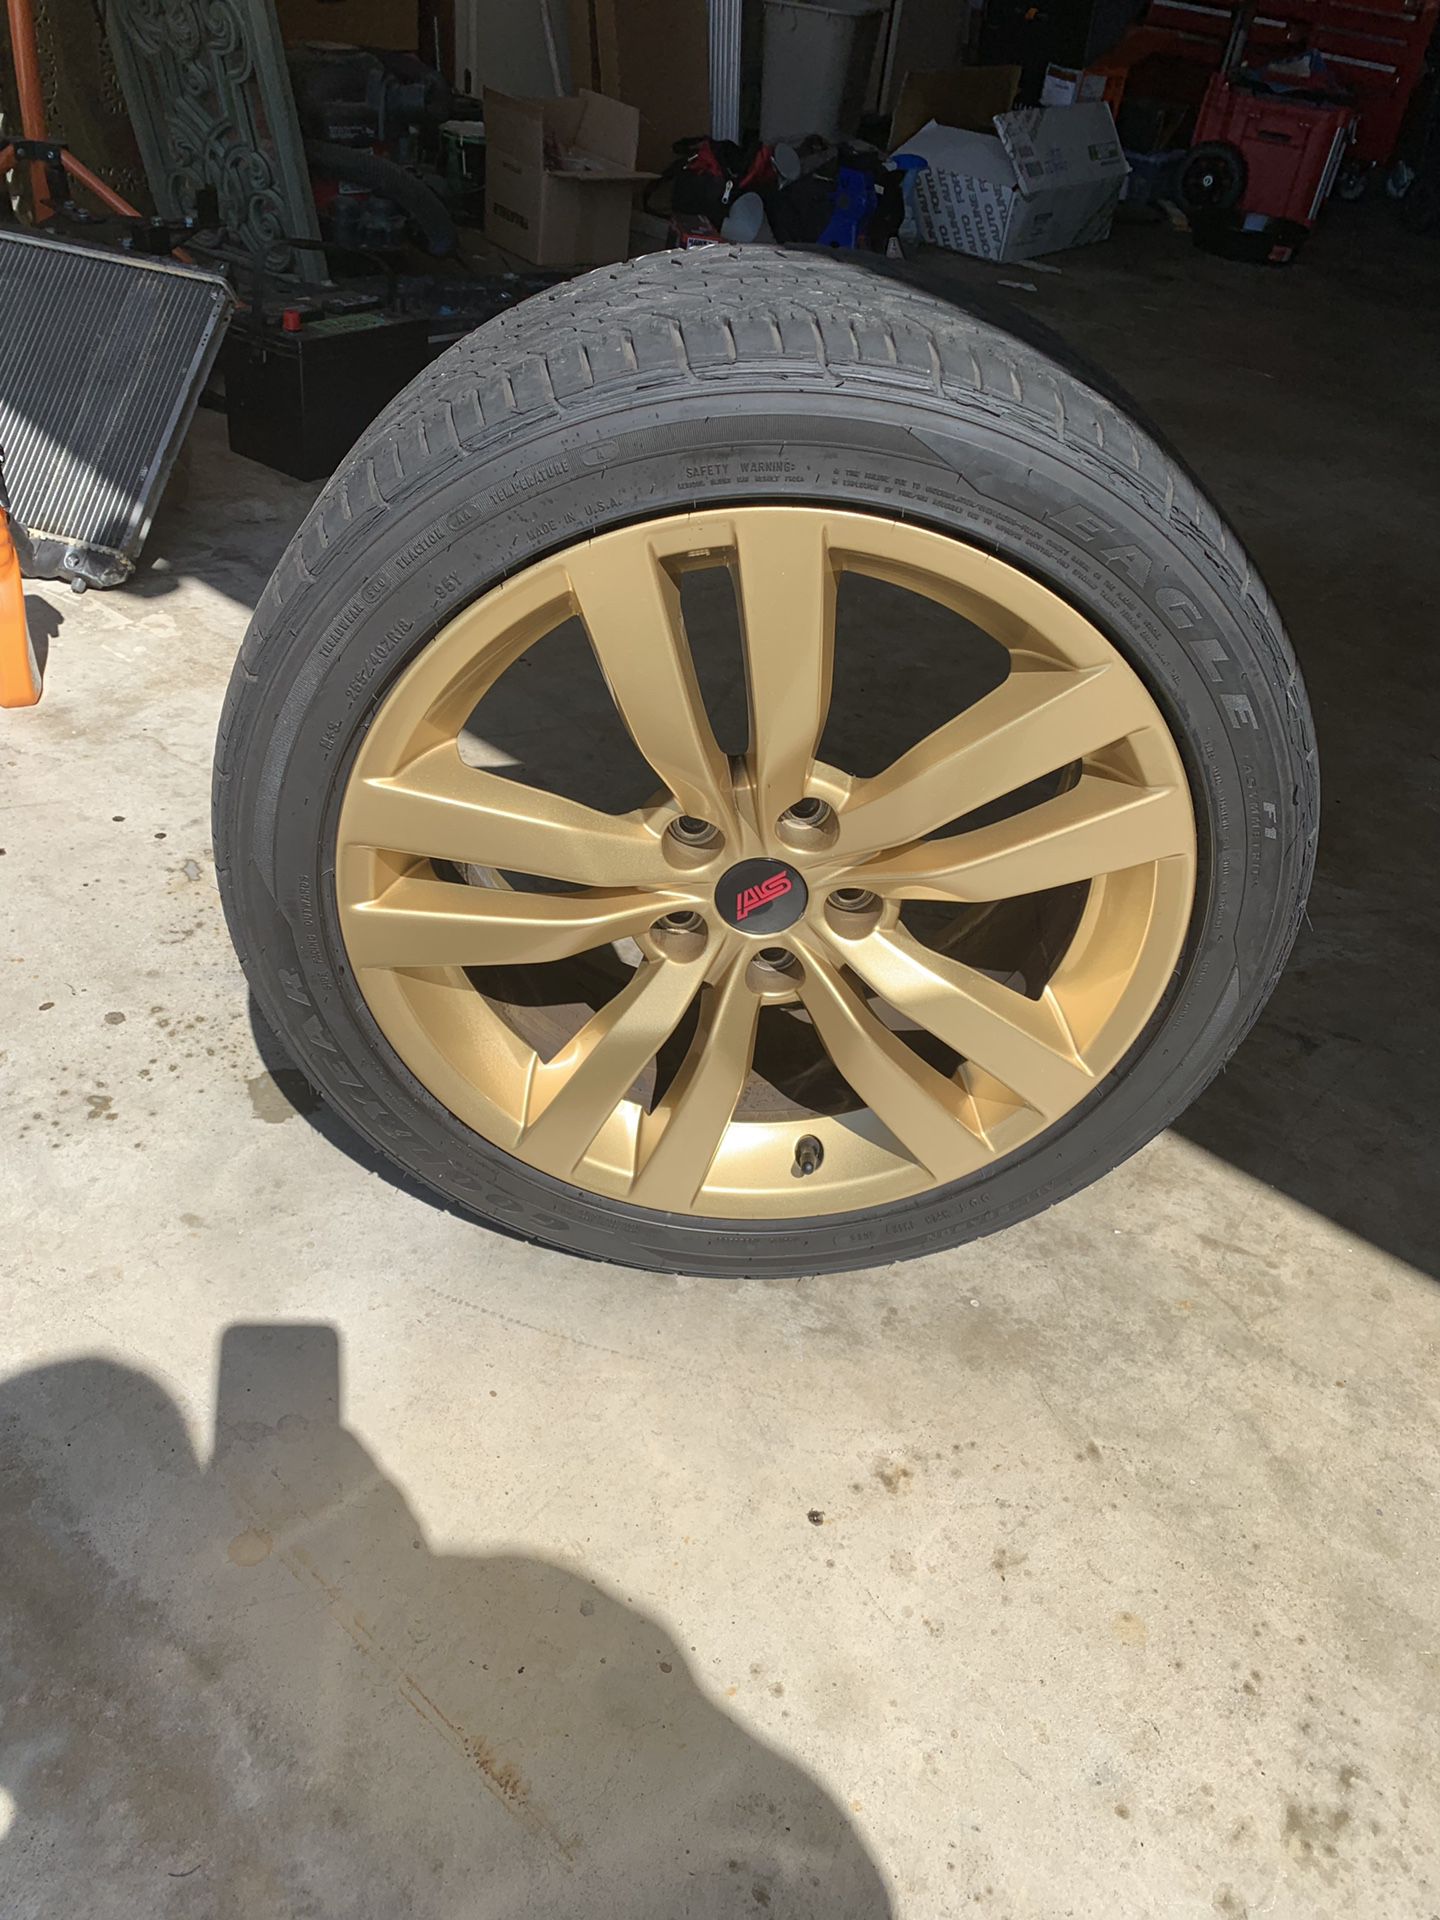 2013 STI rims 18 x 8.5 with good tires. Goodyear F1 a/s tires. Powder coated gold by WRS in Santa Ana. 800 obo